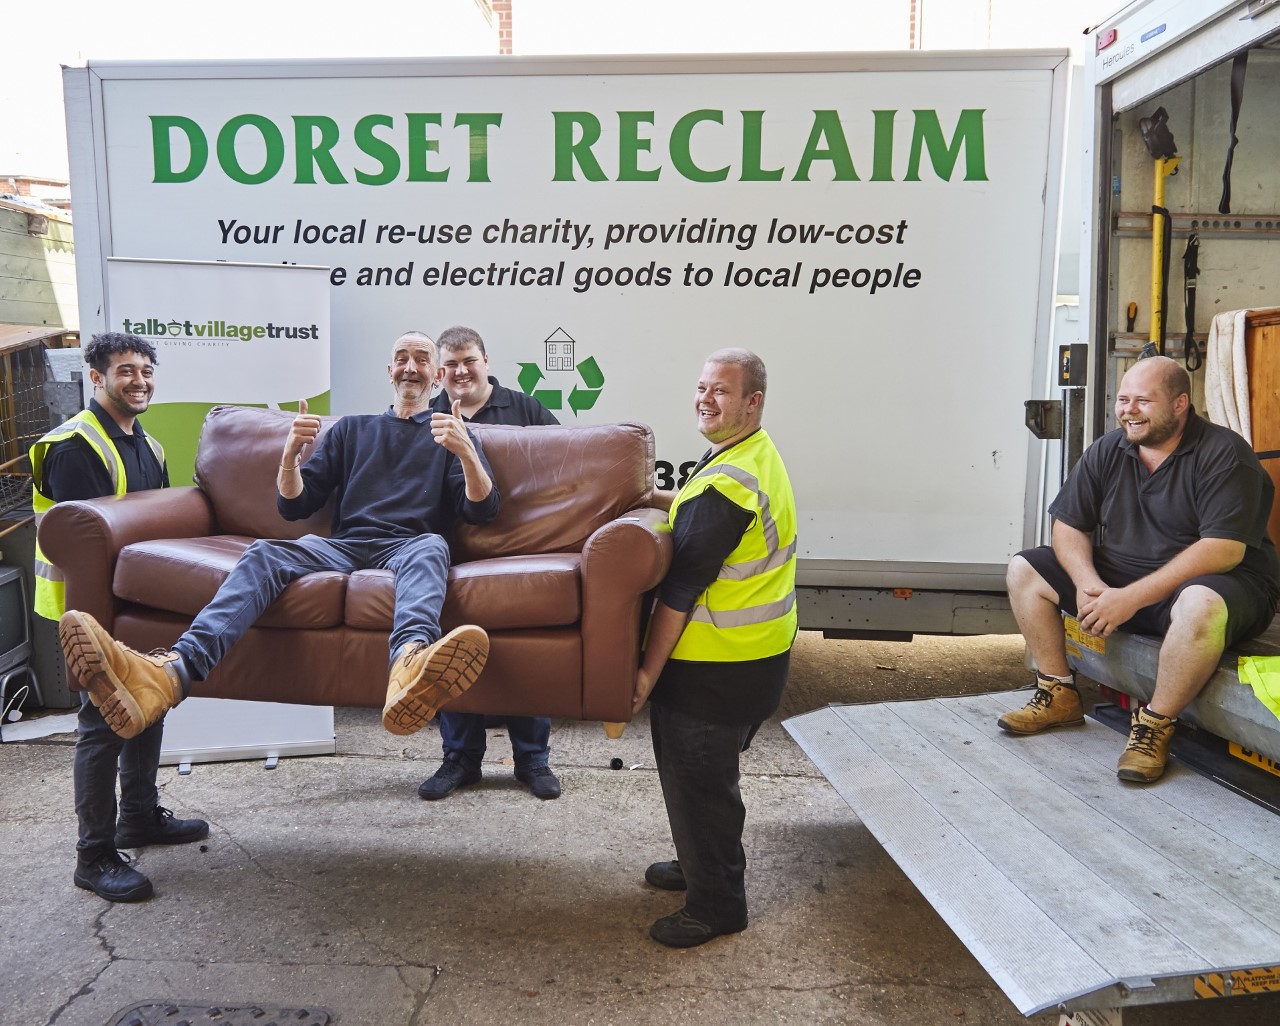 Grant giving charity supports Dorset Reclaim with £20,000 donation